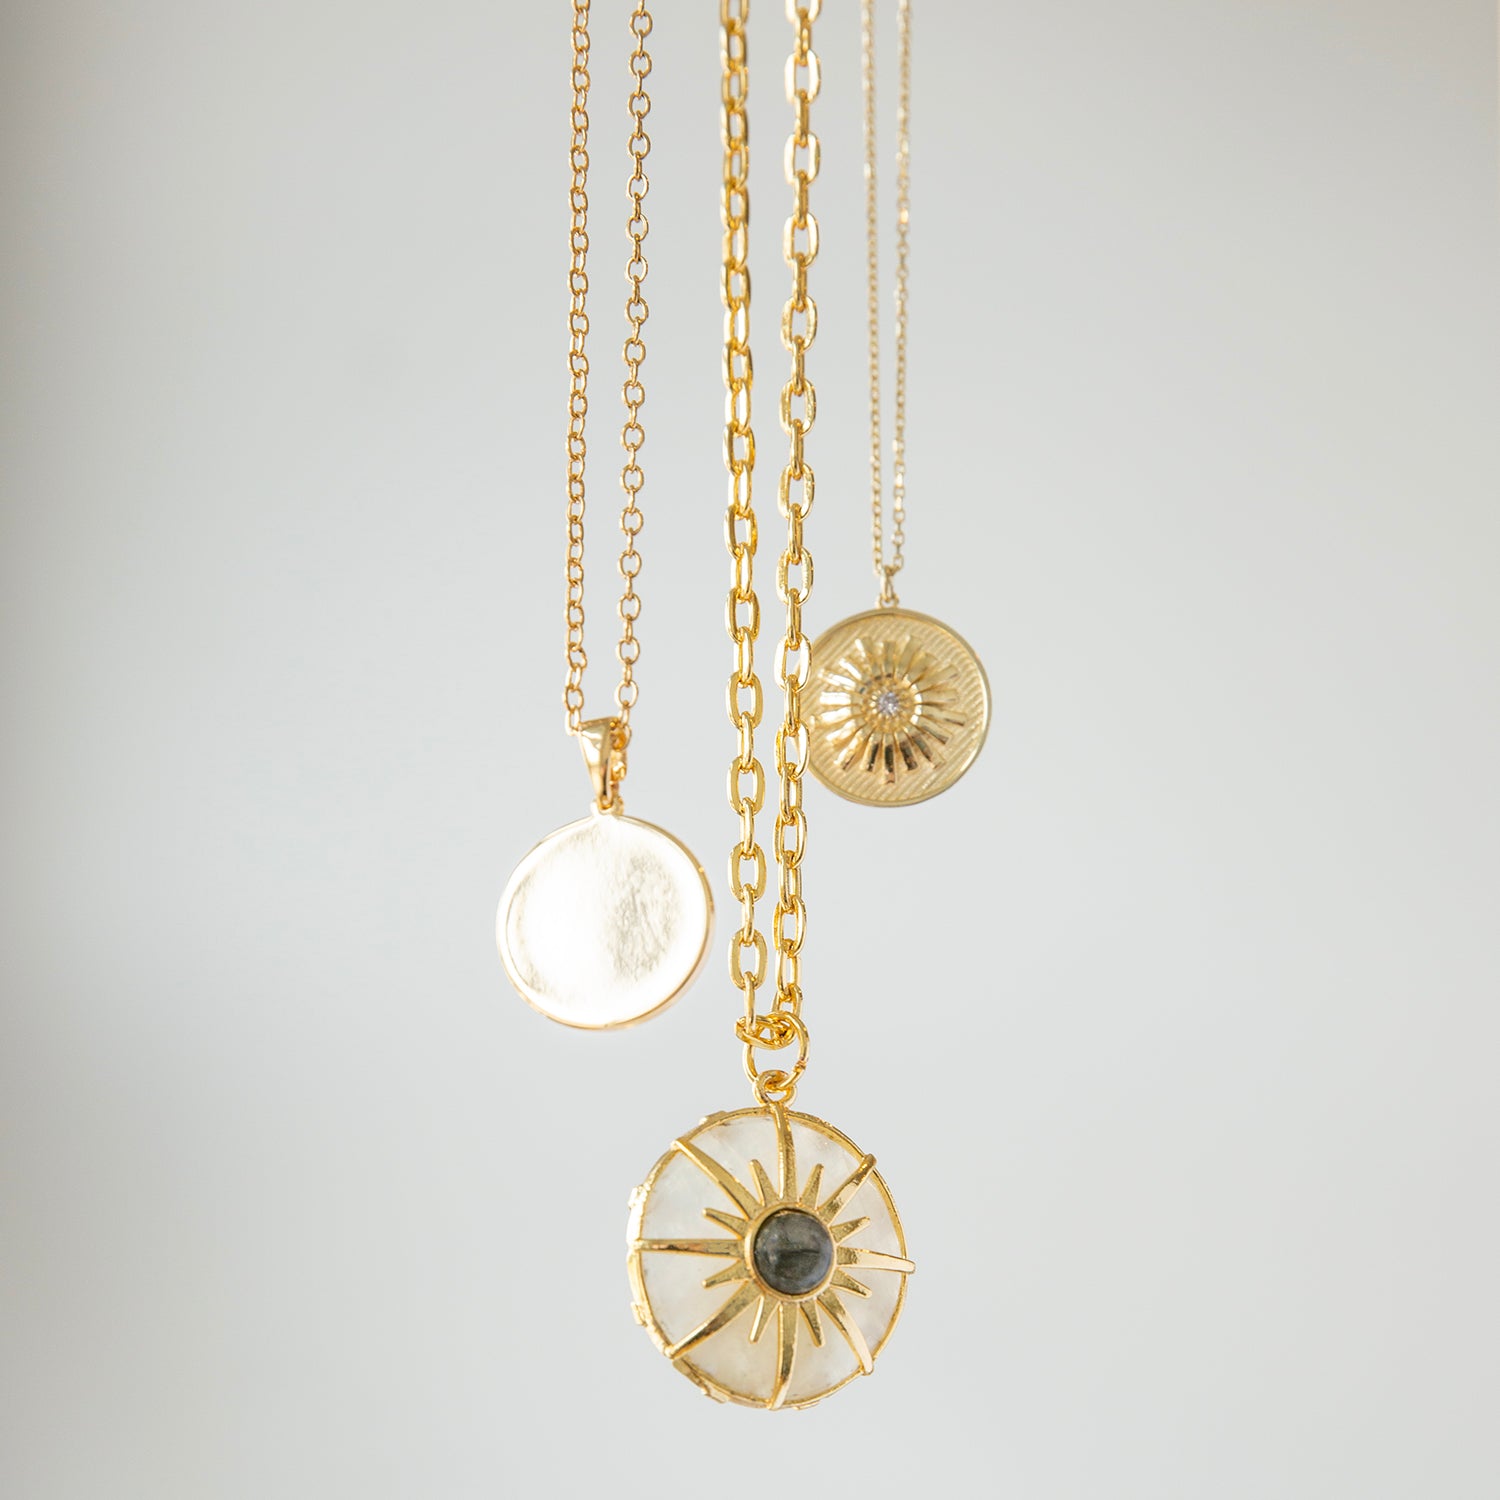 gold plated circle pendant with colored sunburst